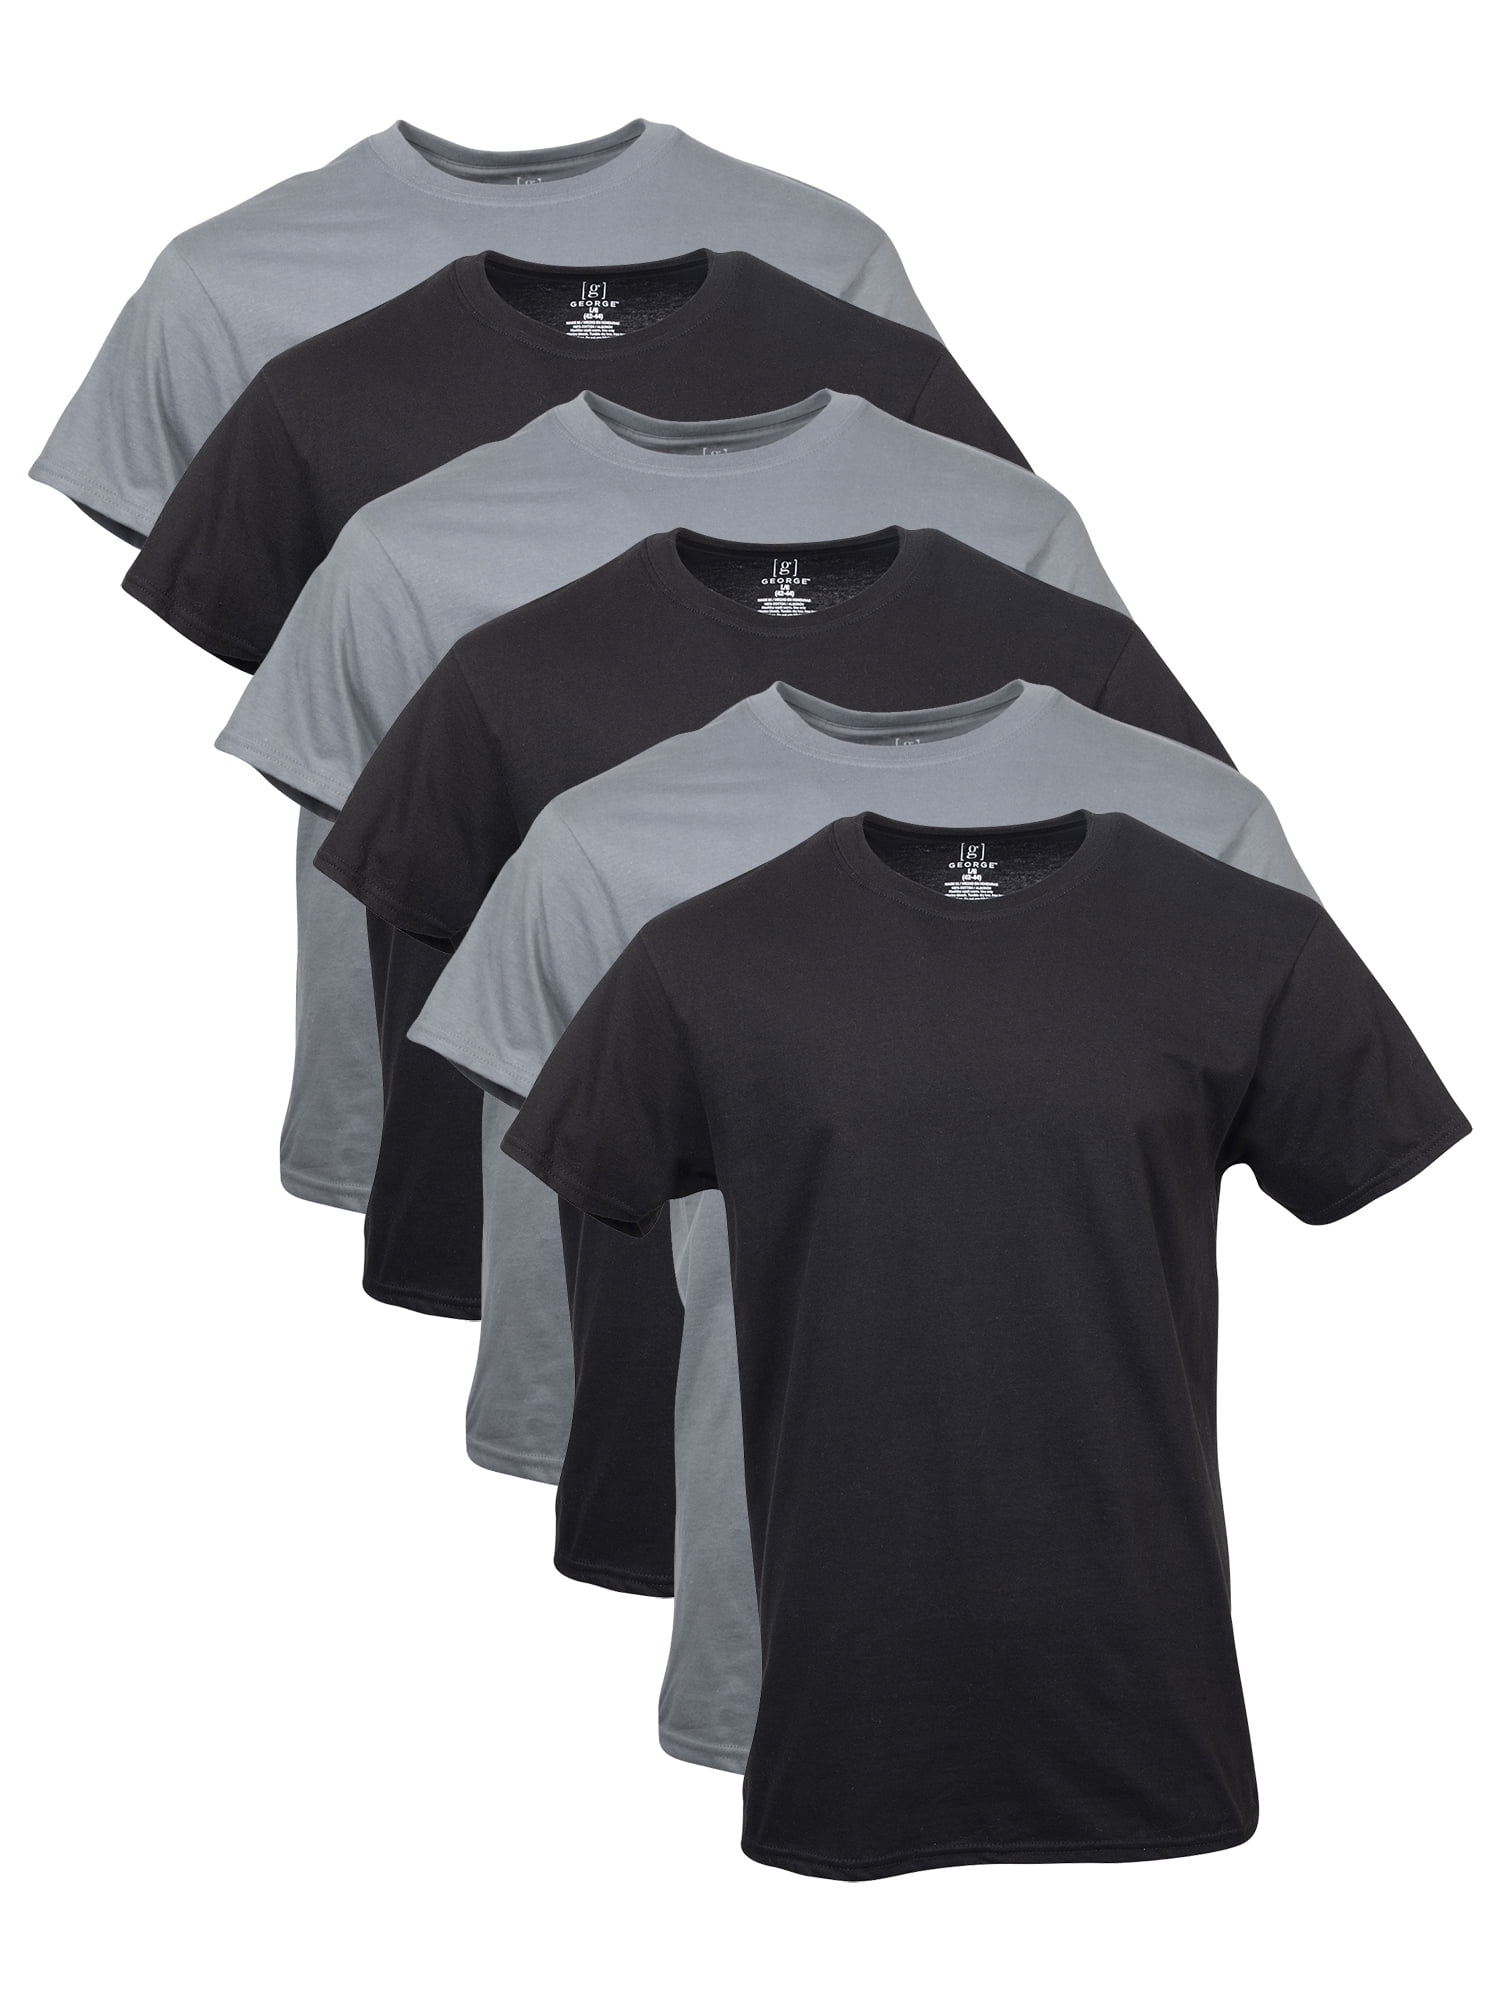 George Men's Assorted Crew T-Shirts, 6-Pack